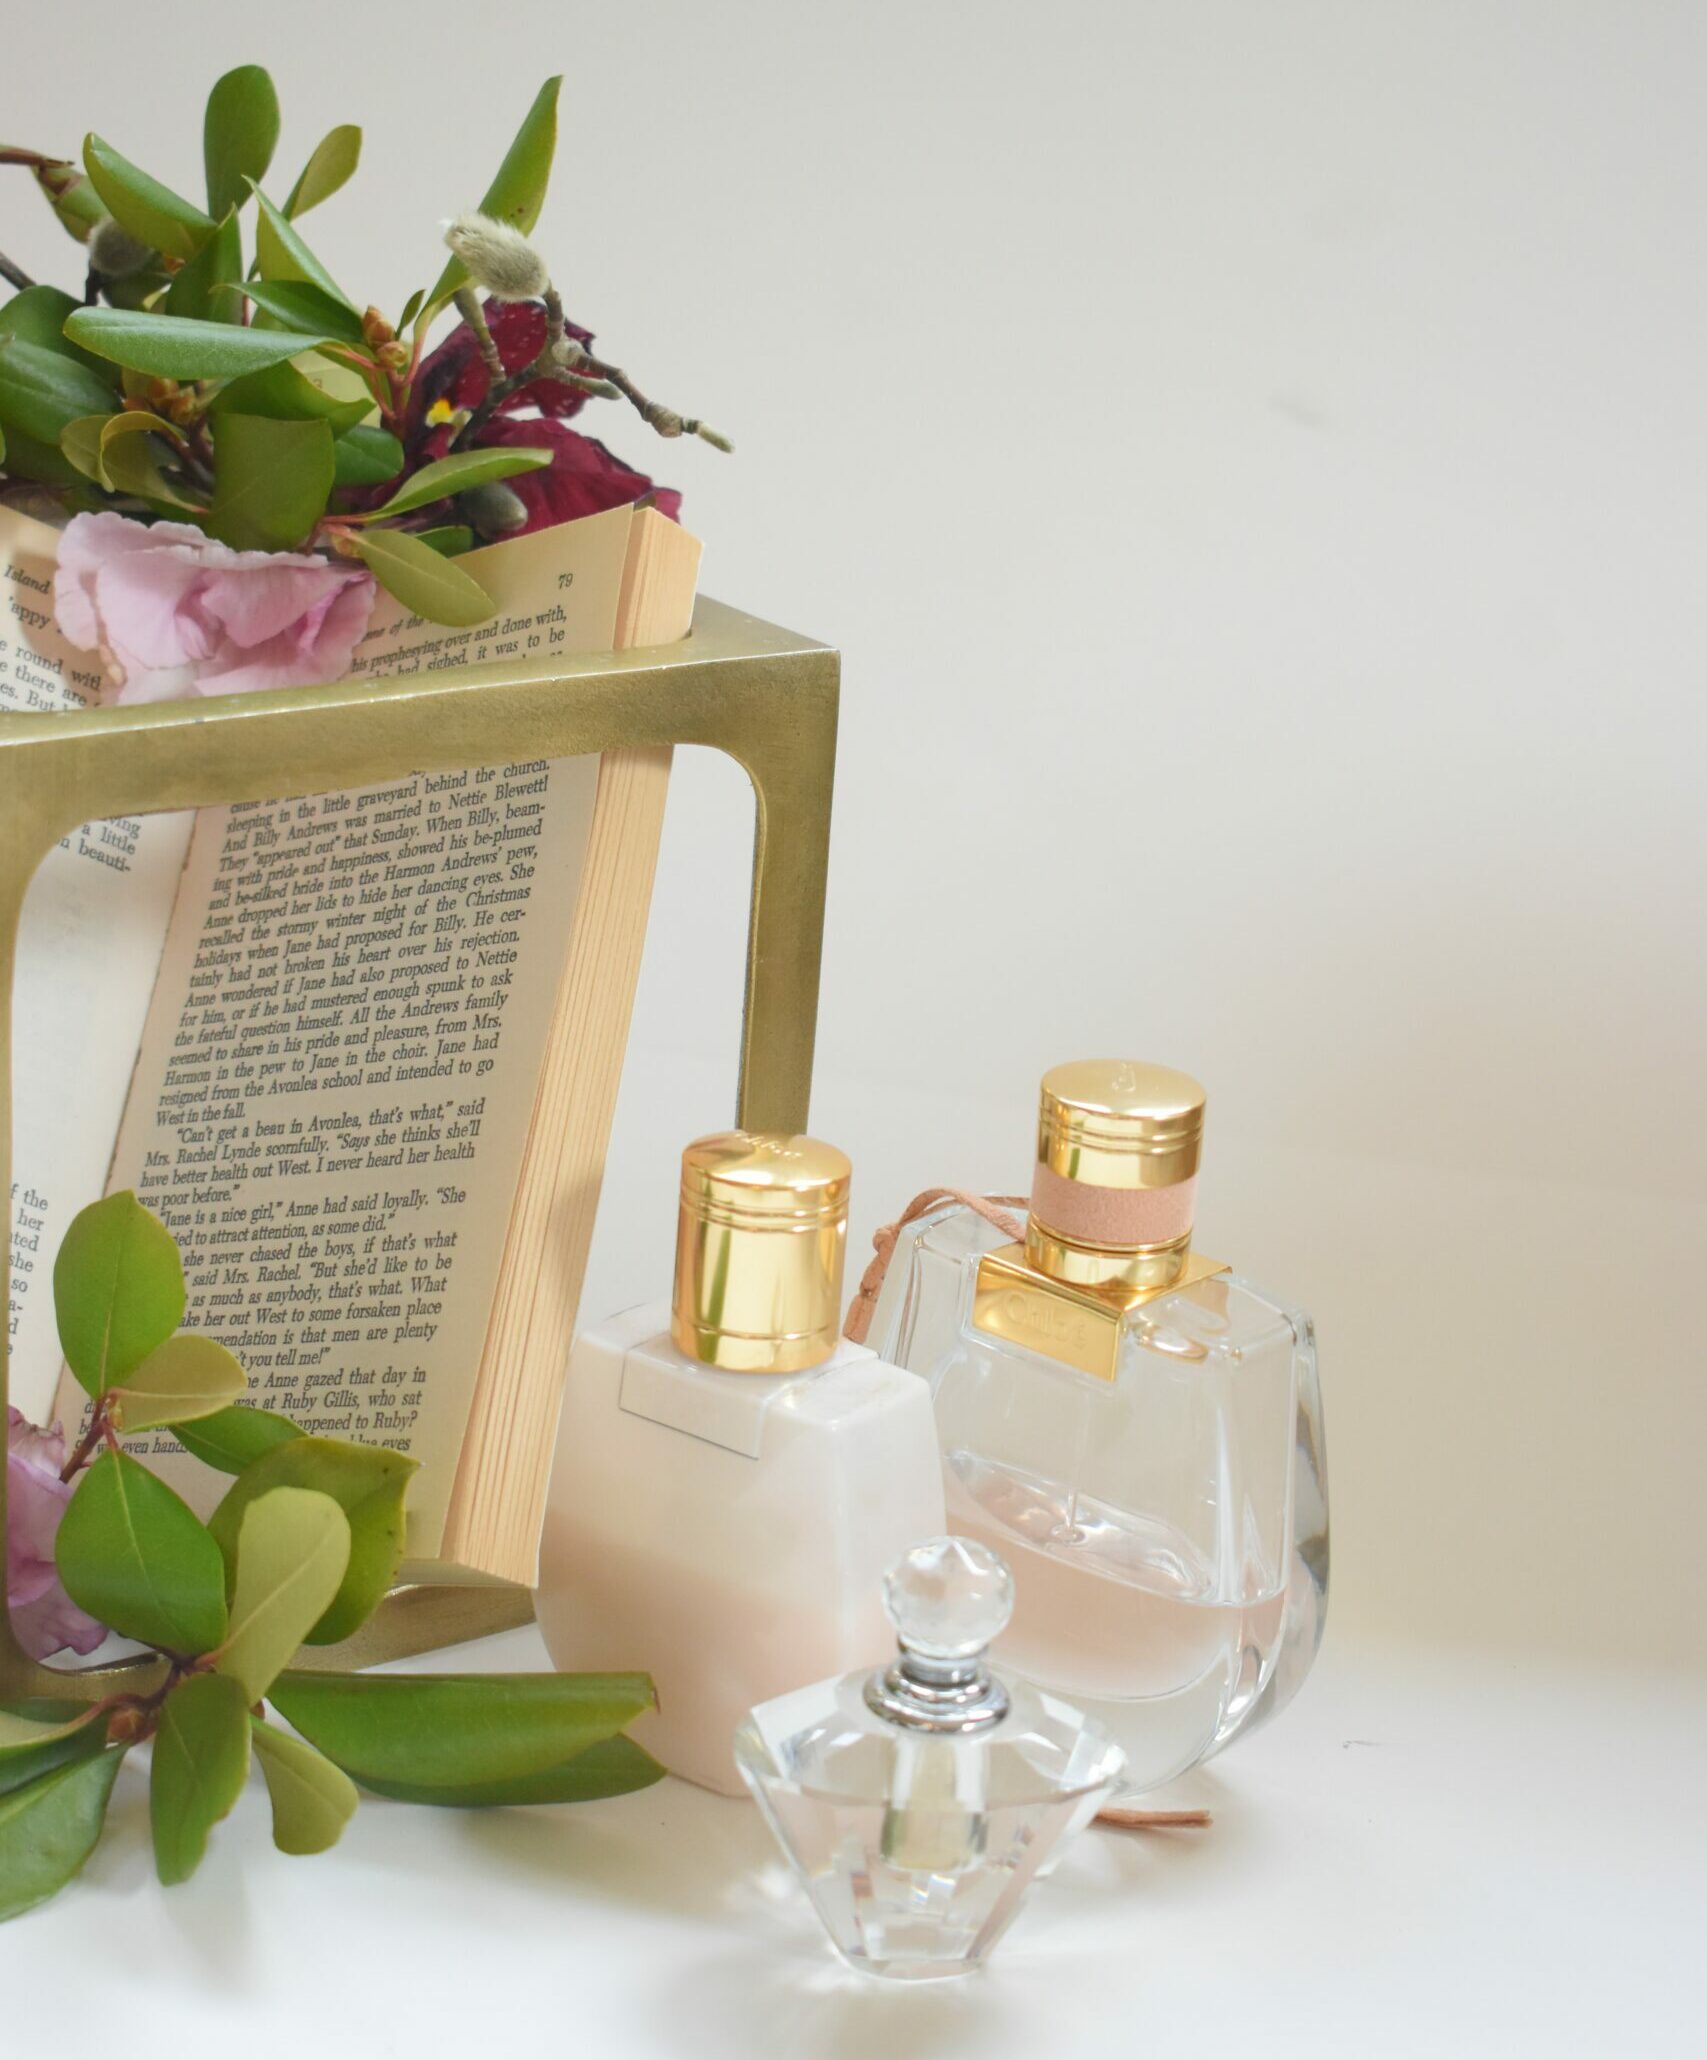 Perfume with books and flowers